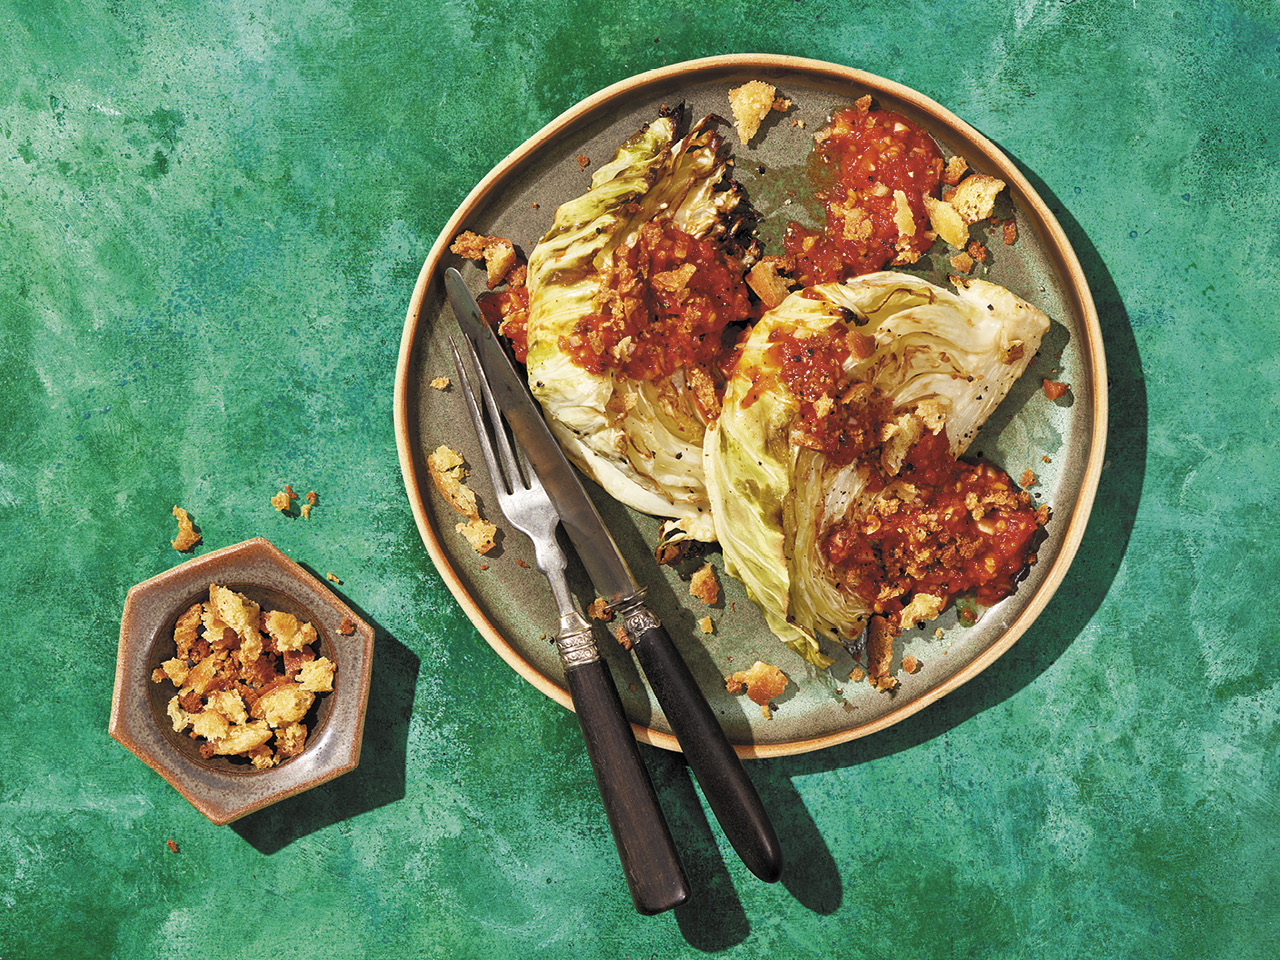 Garlicky Tomato Grilled Cabbage with Crunchy Breadcrumbs